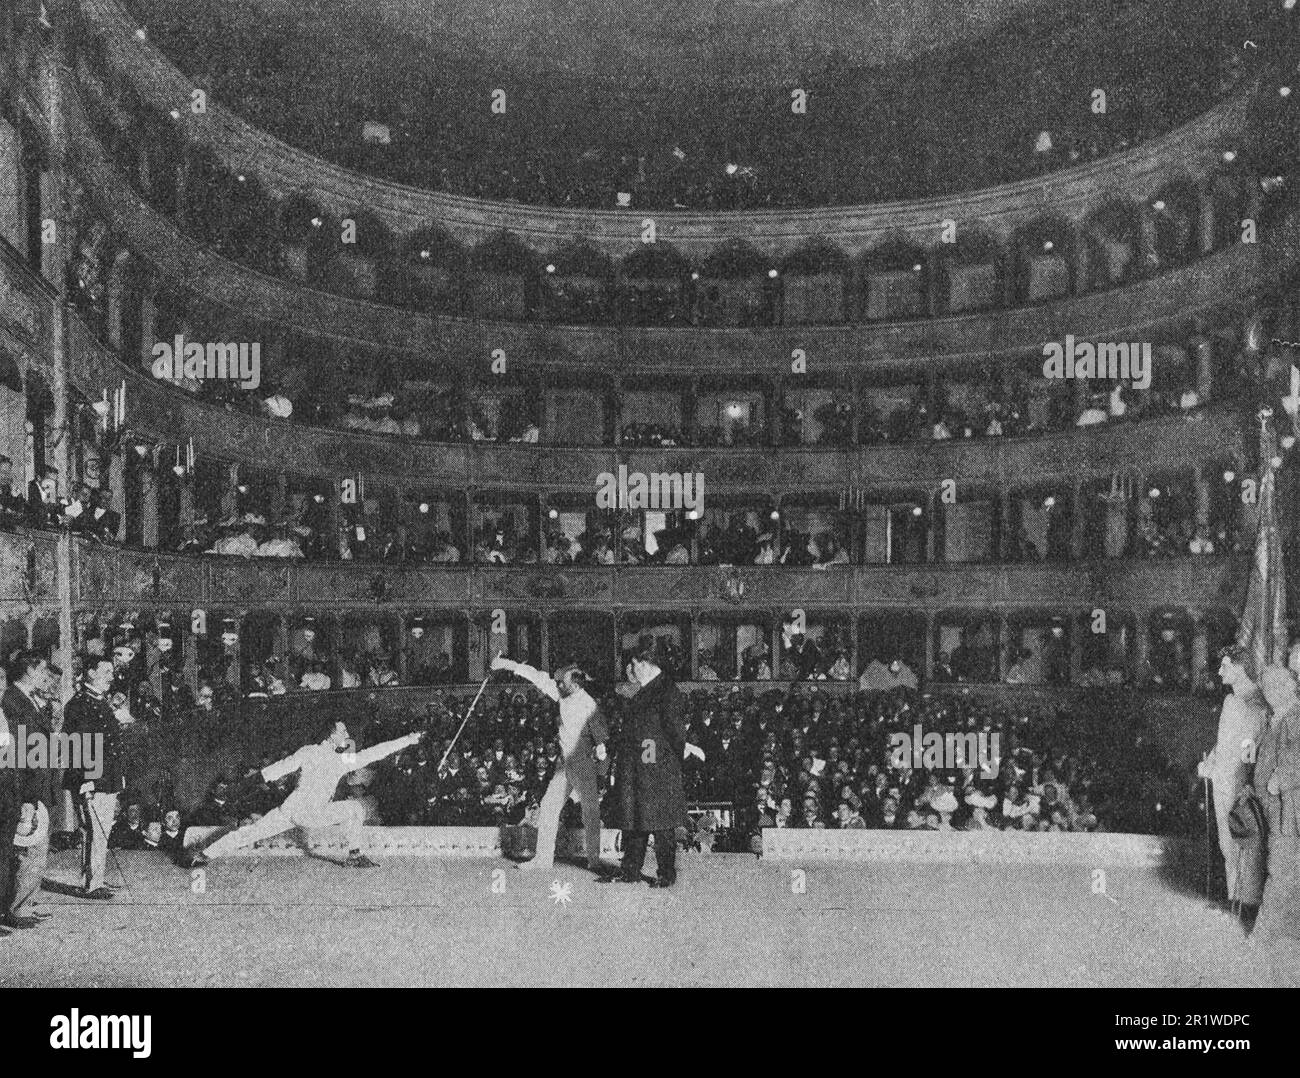 Public fencing competition in Venice. Photo from the beginning of the 20th century. Stock Photo